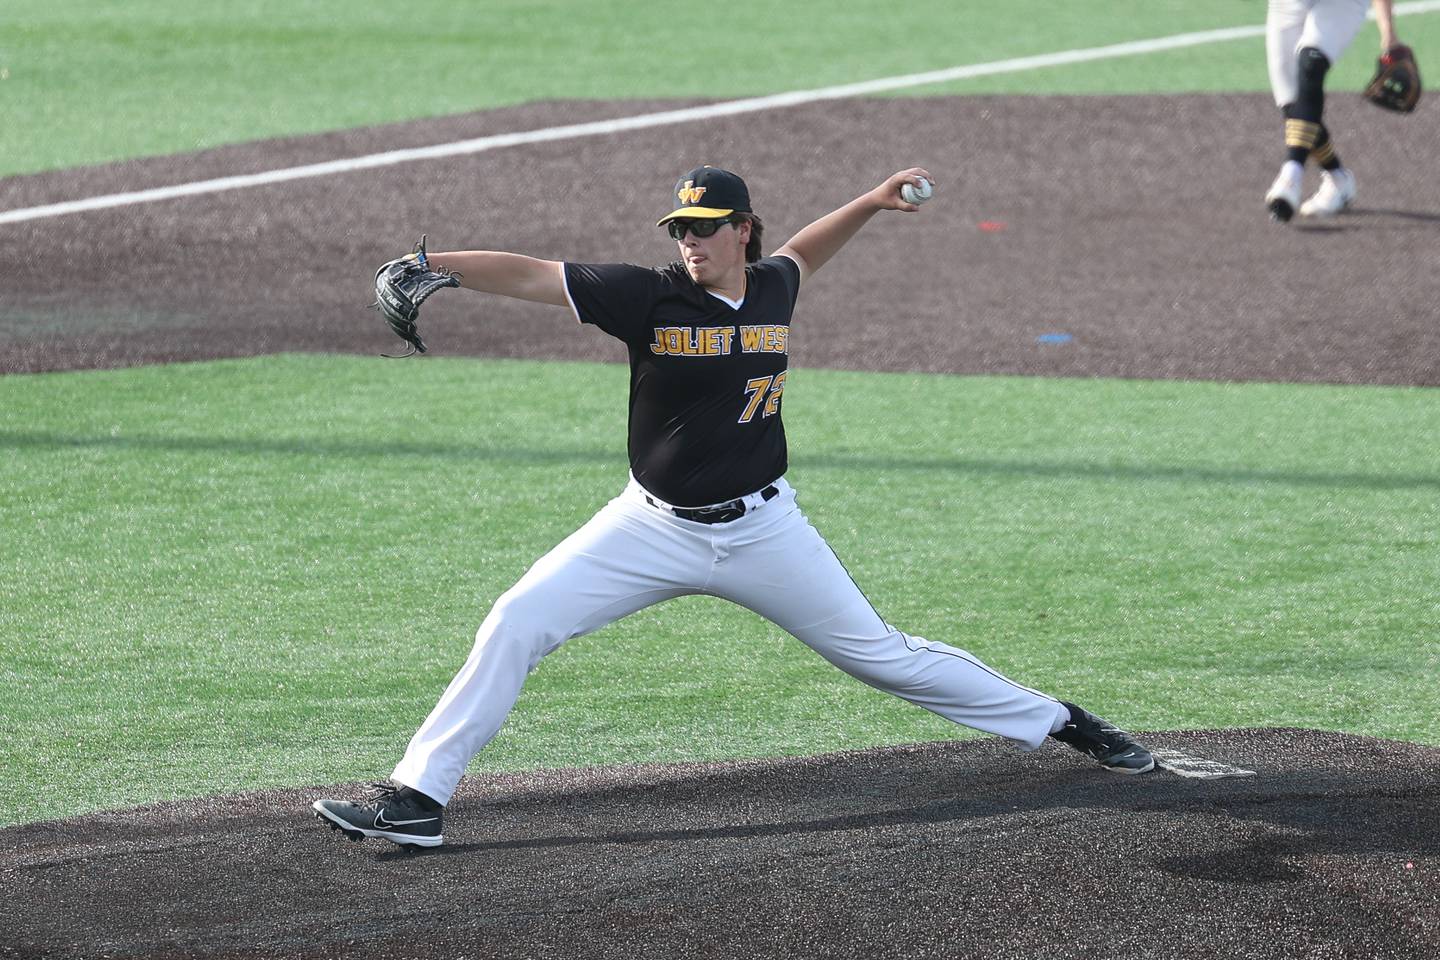 Joliet West’s Conner Hogan delivers a pitch against Joliet Central on Thursday, May 11, 2023 in Joliet.